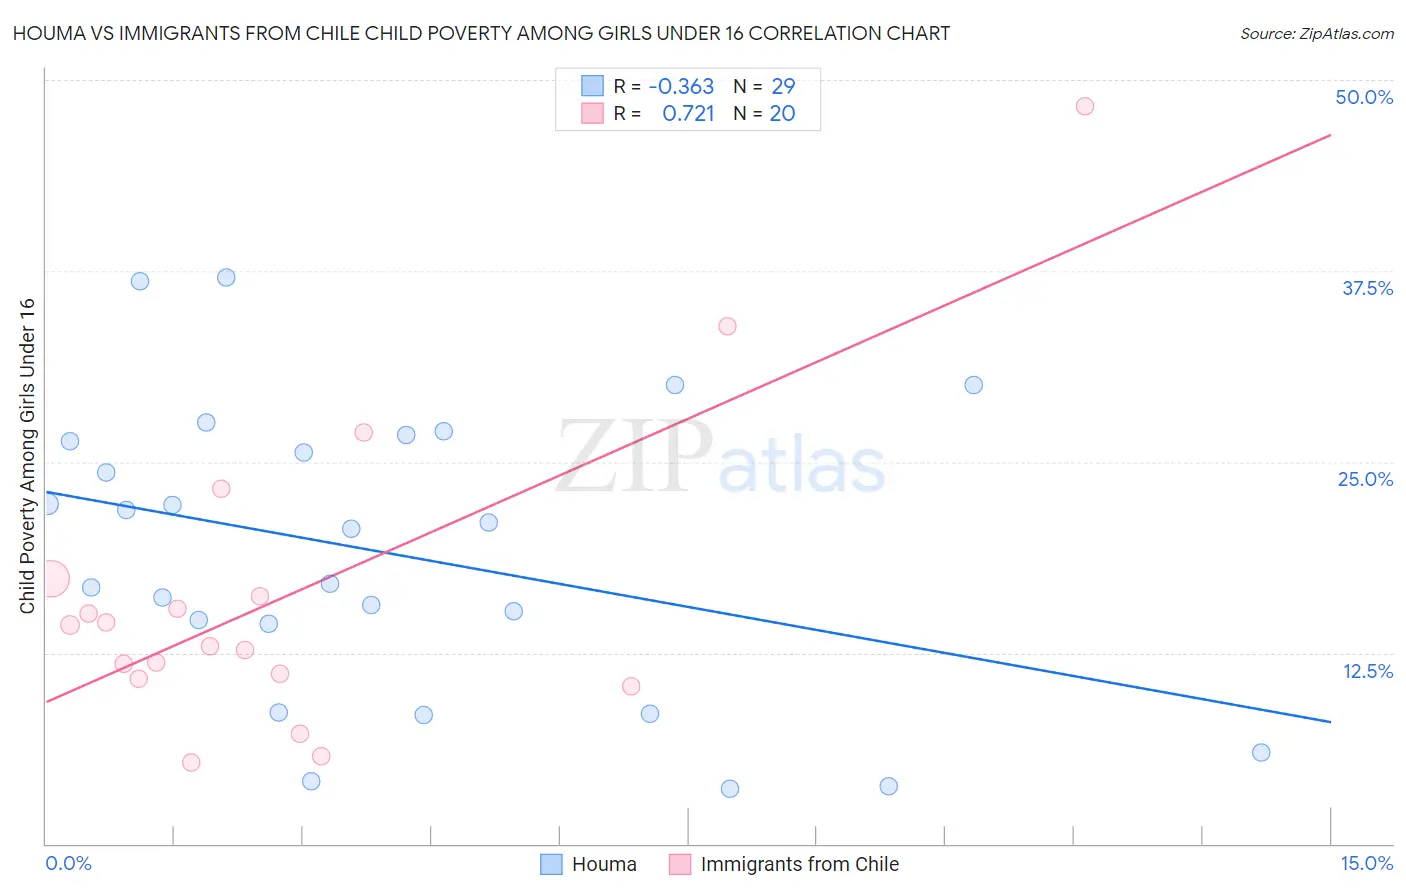 Houma vs Immigrants from Chile Child Poverty Among Girls Under 16